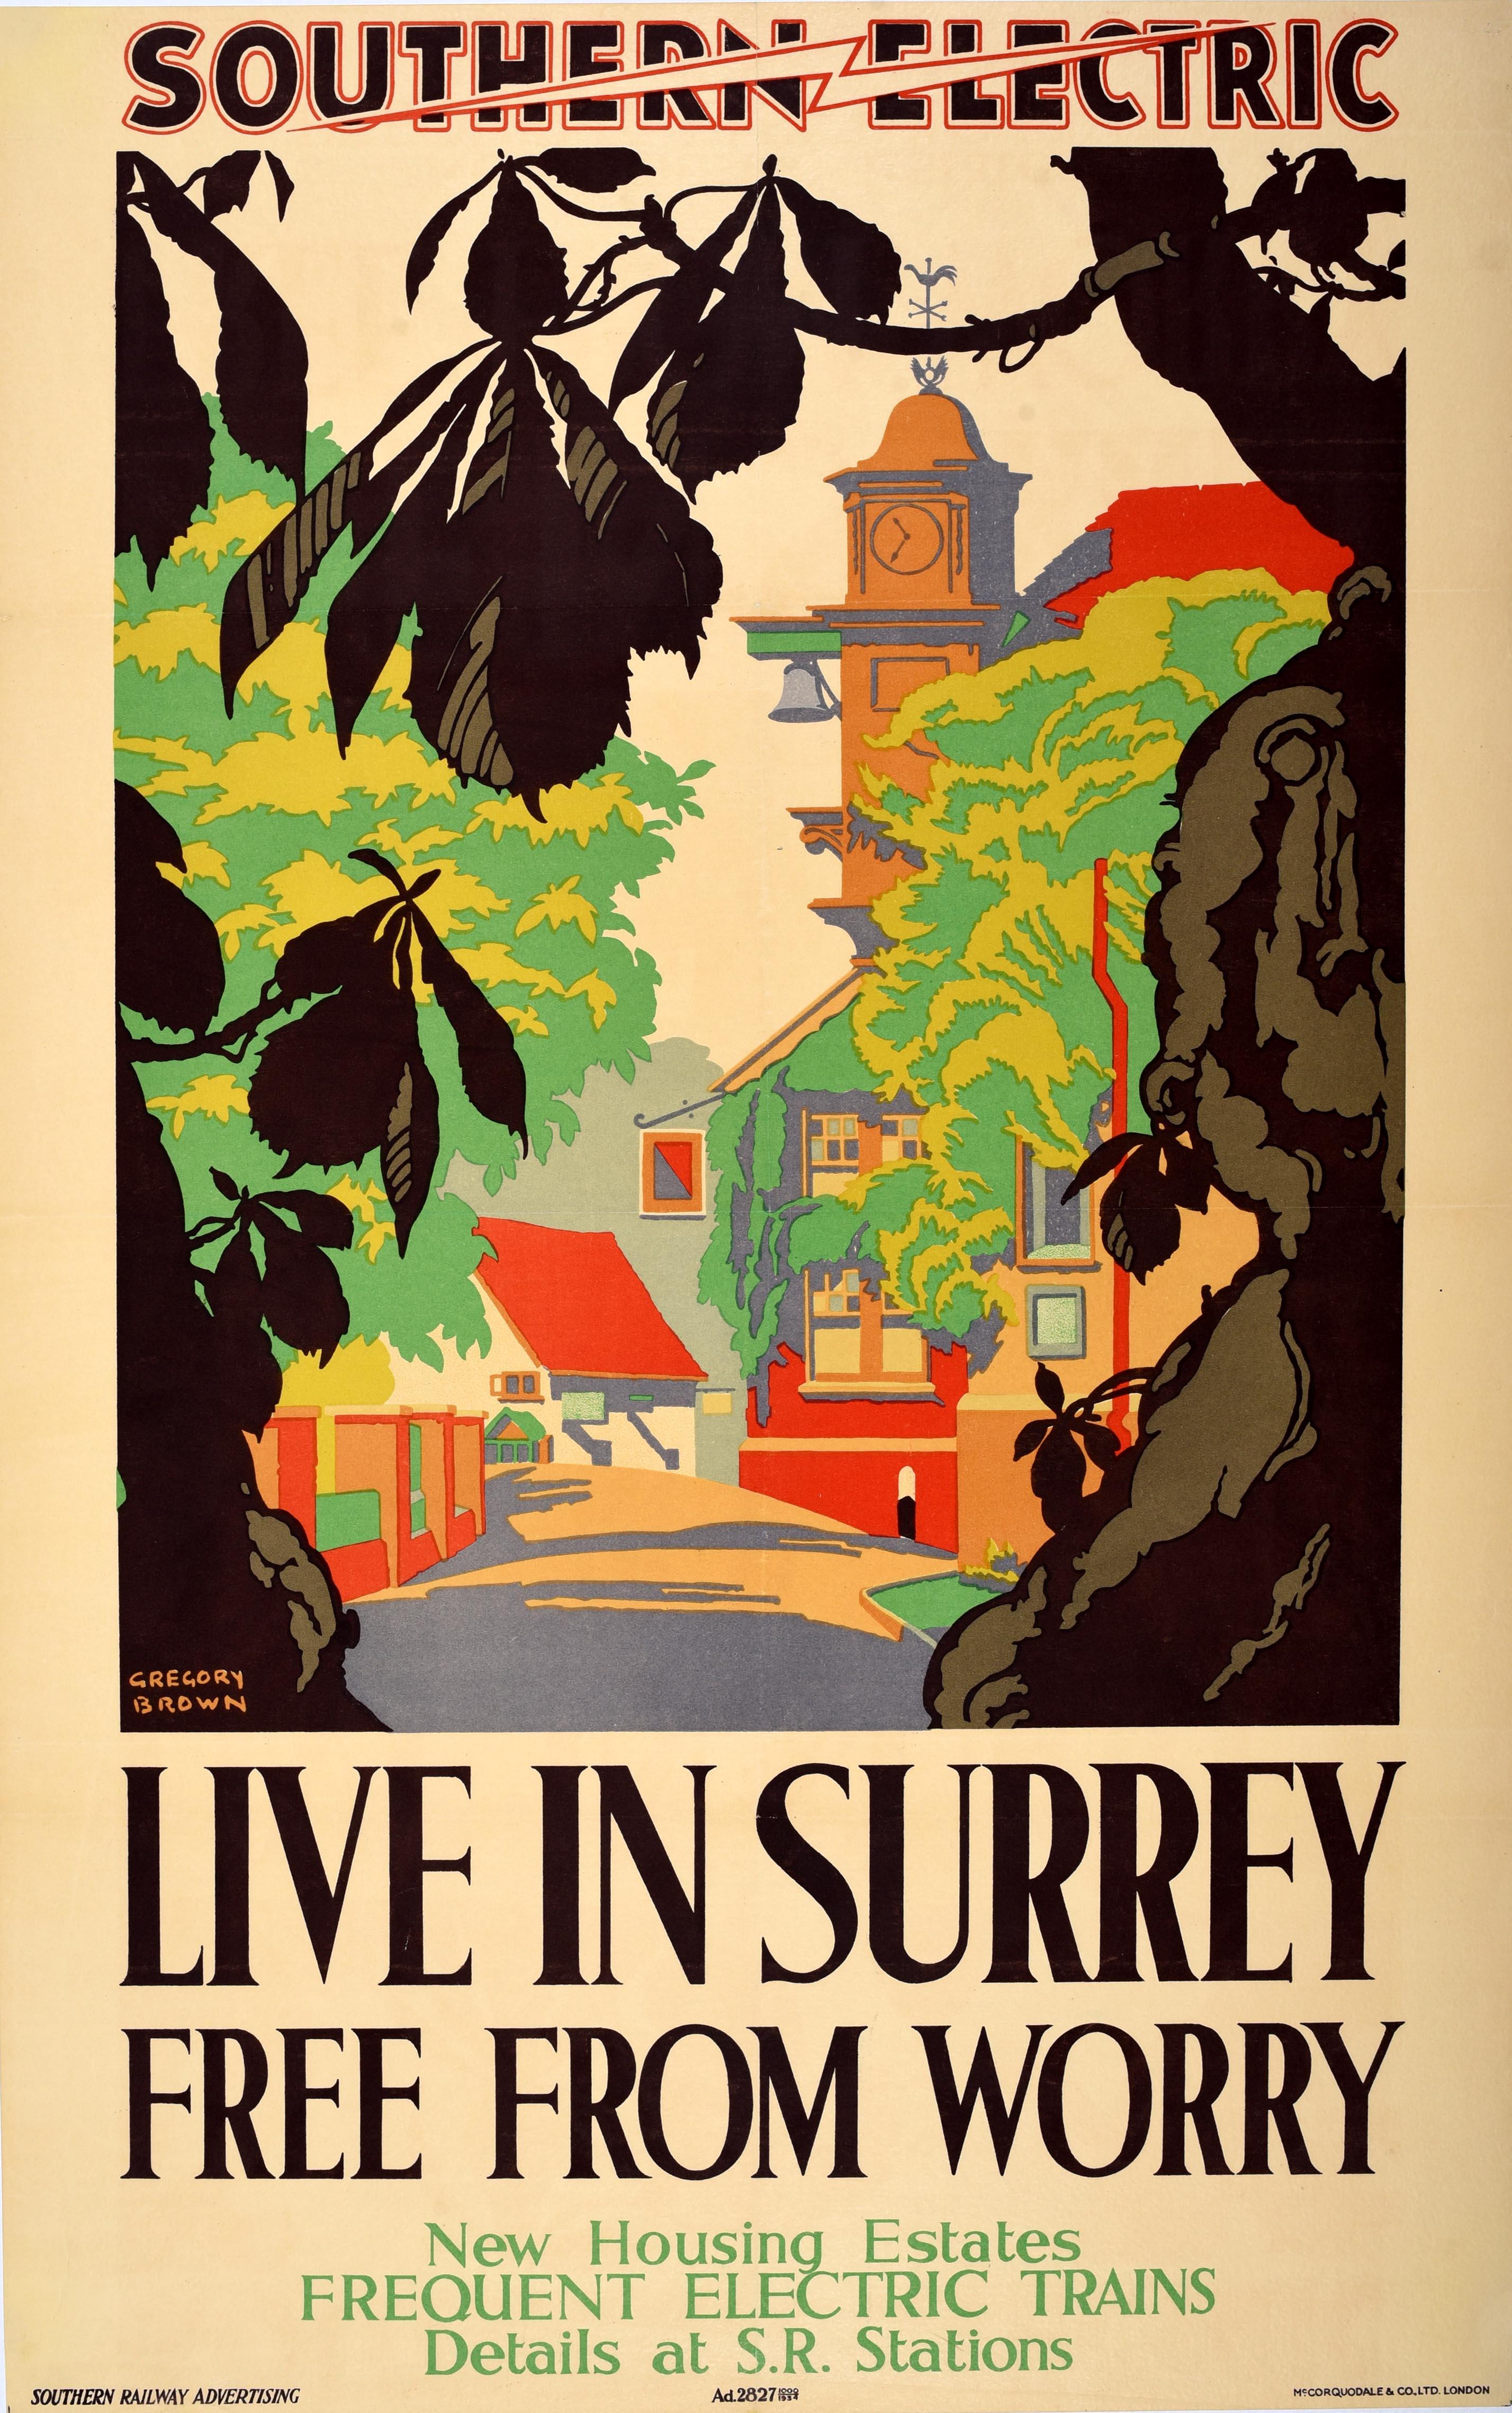 Frederic Gregory Brown Print – Original Vintage-Reiseplakat „ Live In Surrey Free From Worry Southern Electric“, Vintage